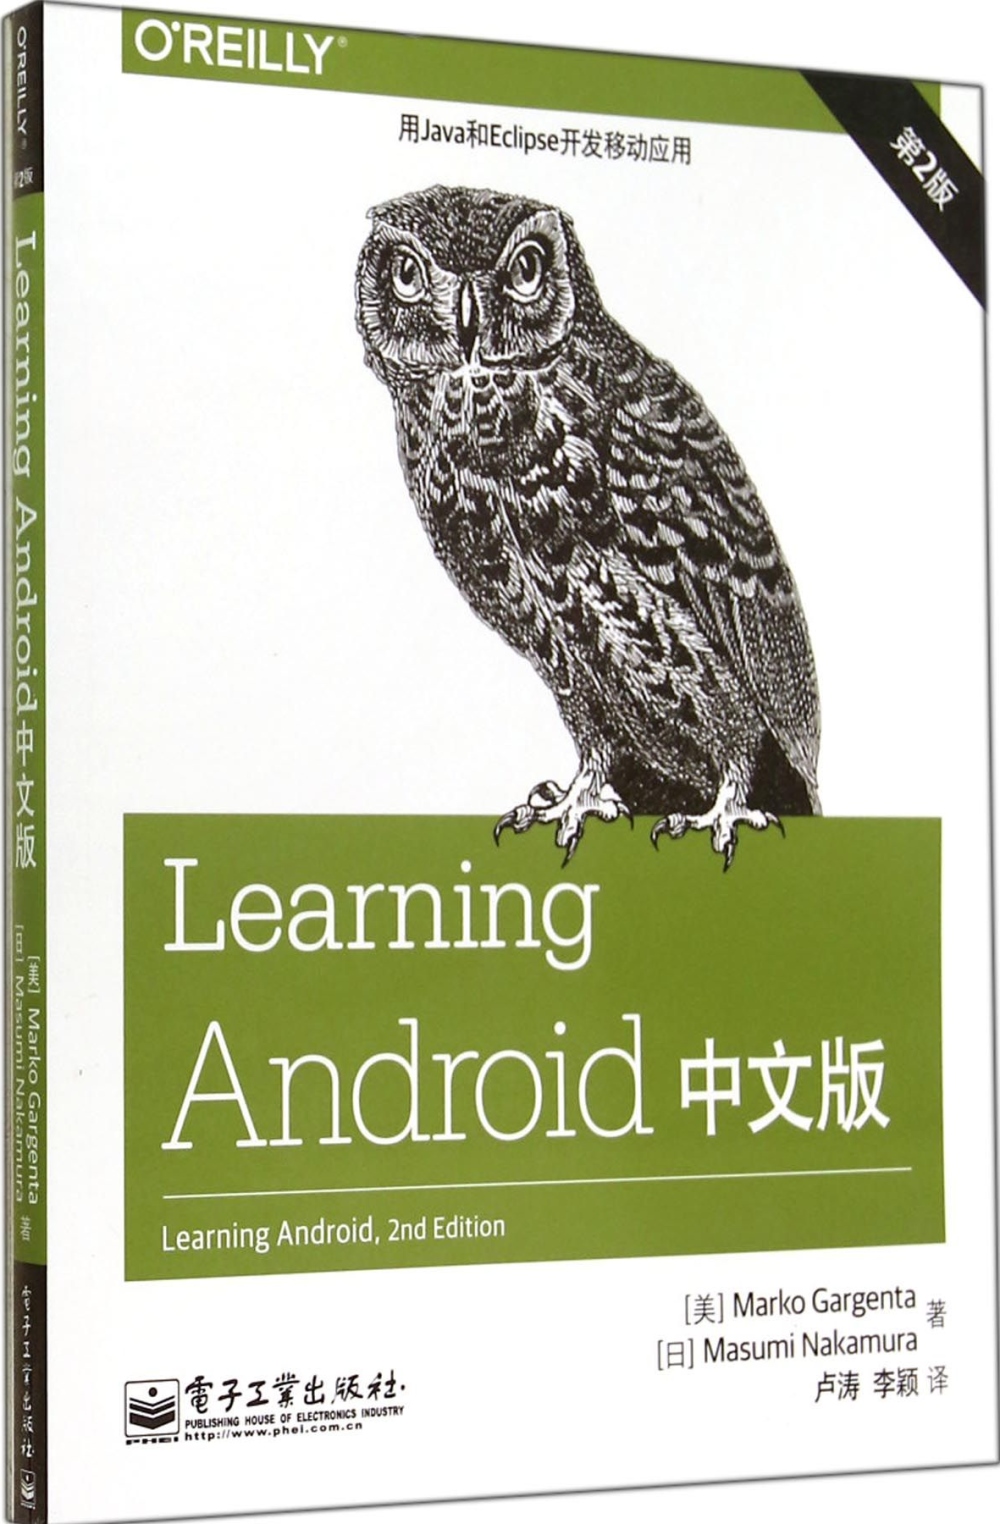 Learning Android中文版（第2版）